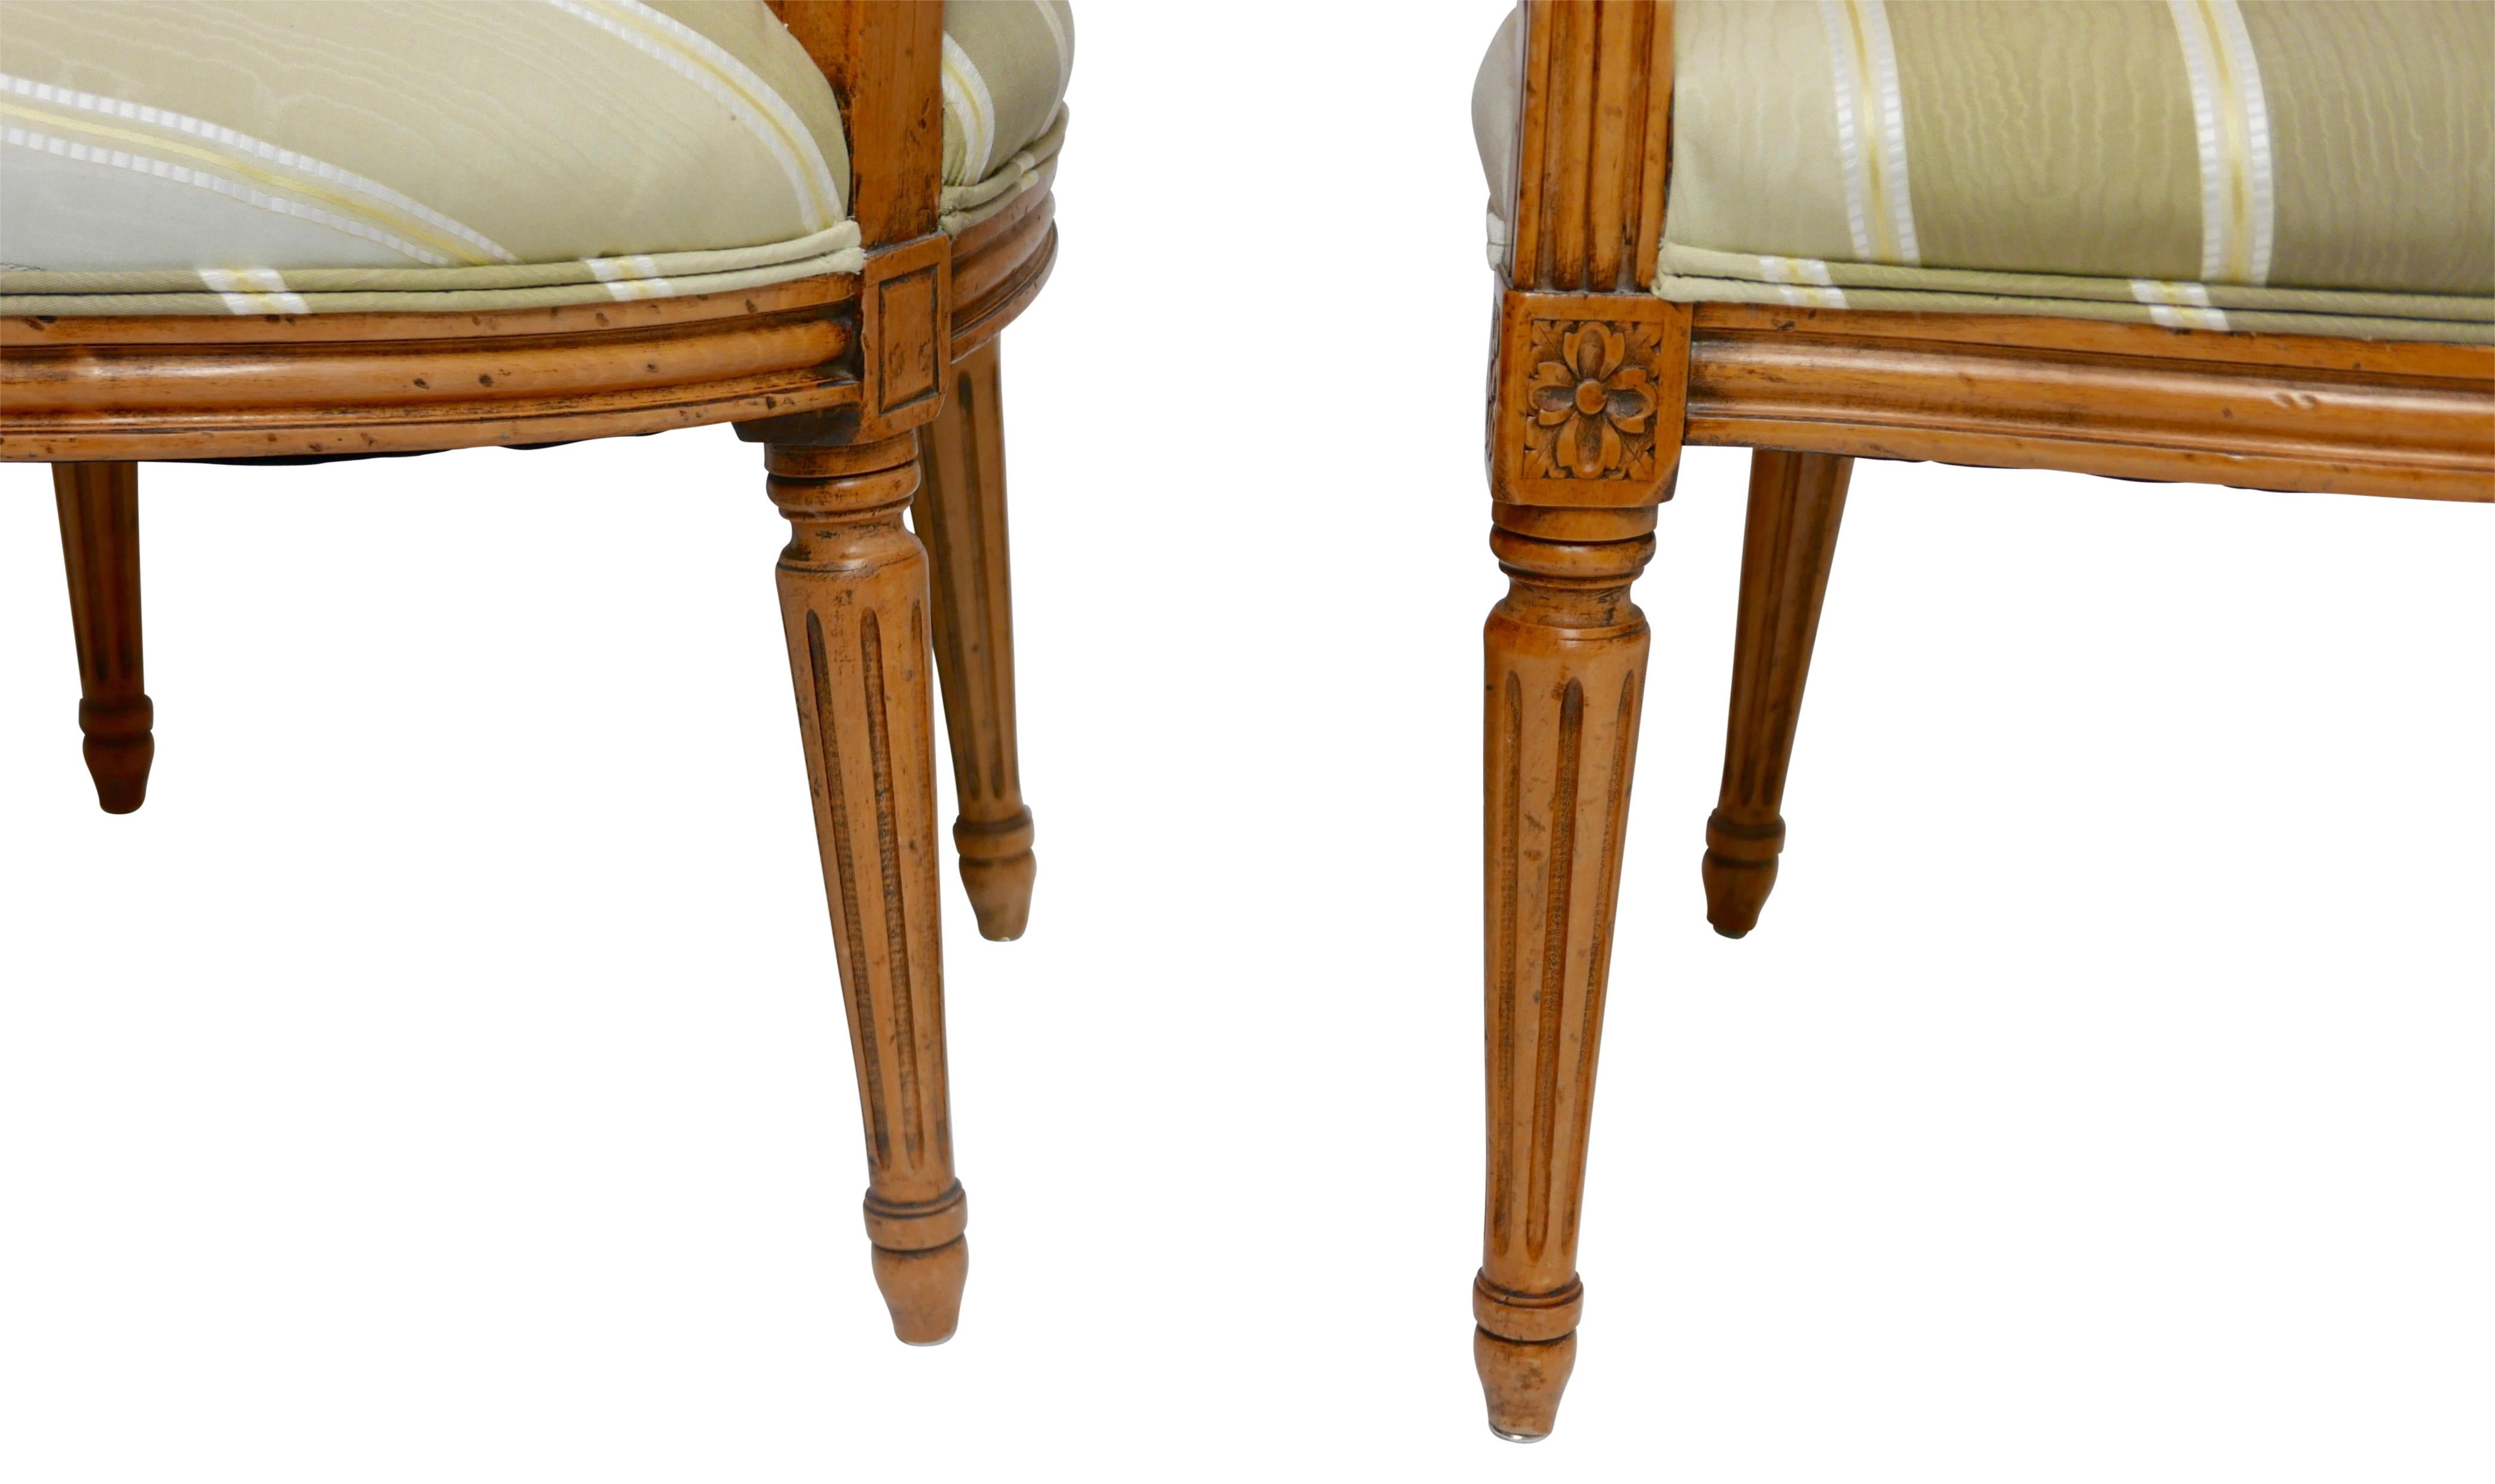 Upholstery Pair of Louis XVI Fauteuils Armchairs with Carved Frames, French, circa 1800